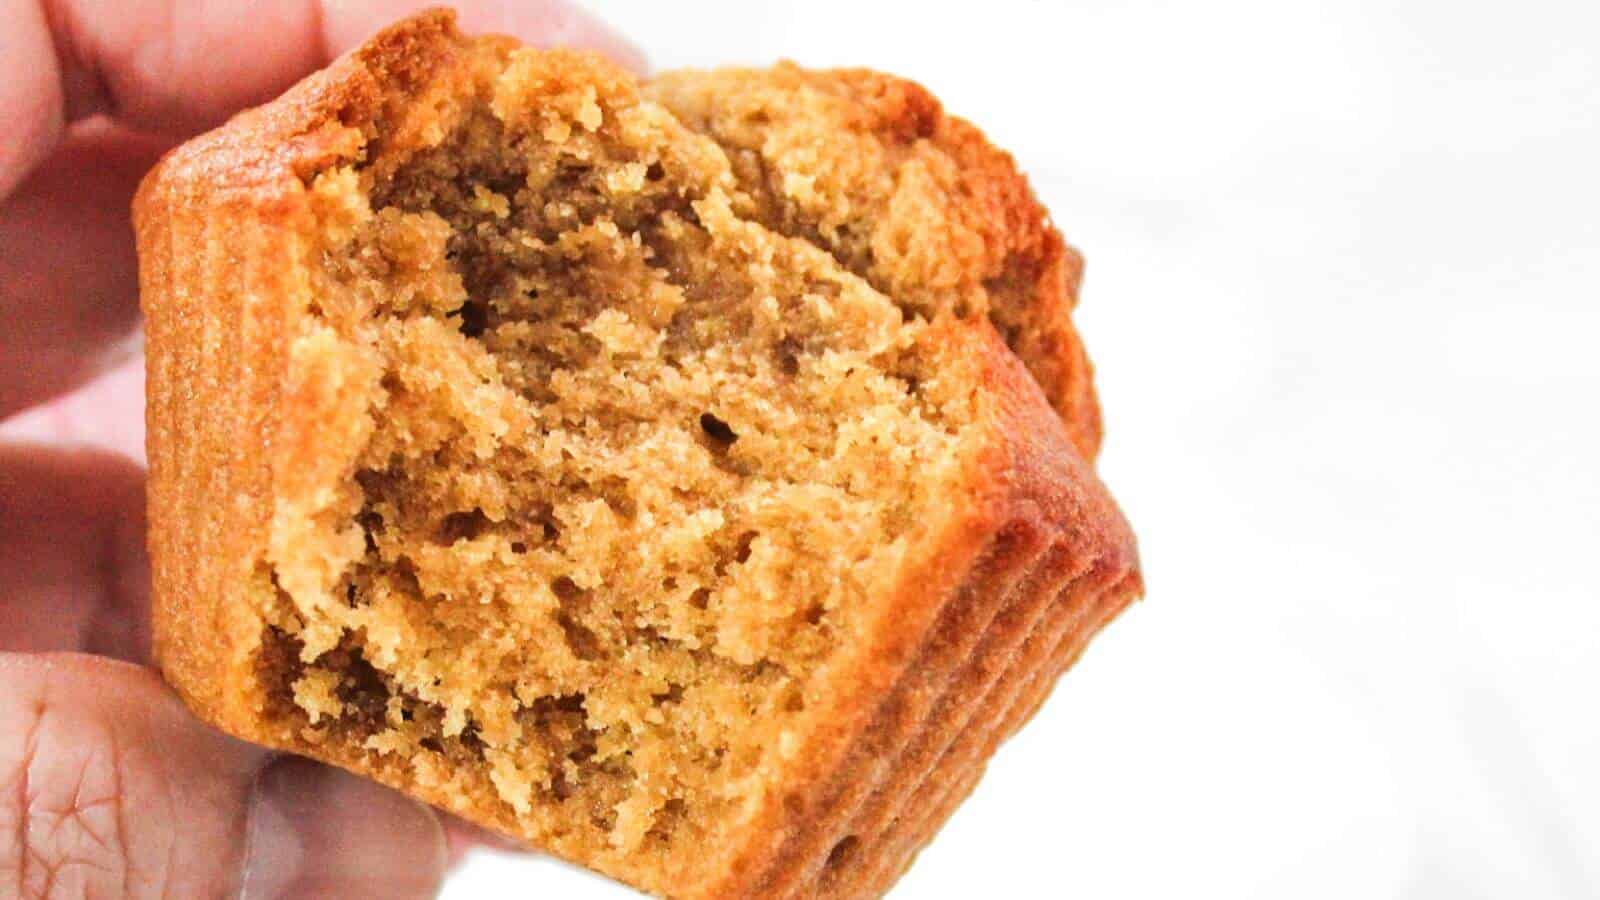 A person holds a partially eaten, golden-brown muffin, showcasing its fluffy and moist texture.